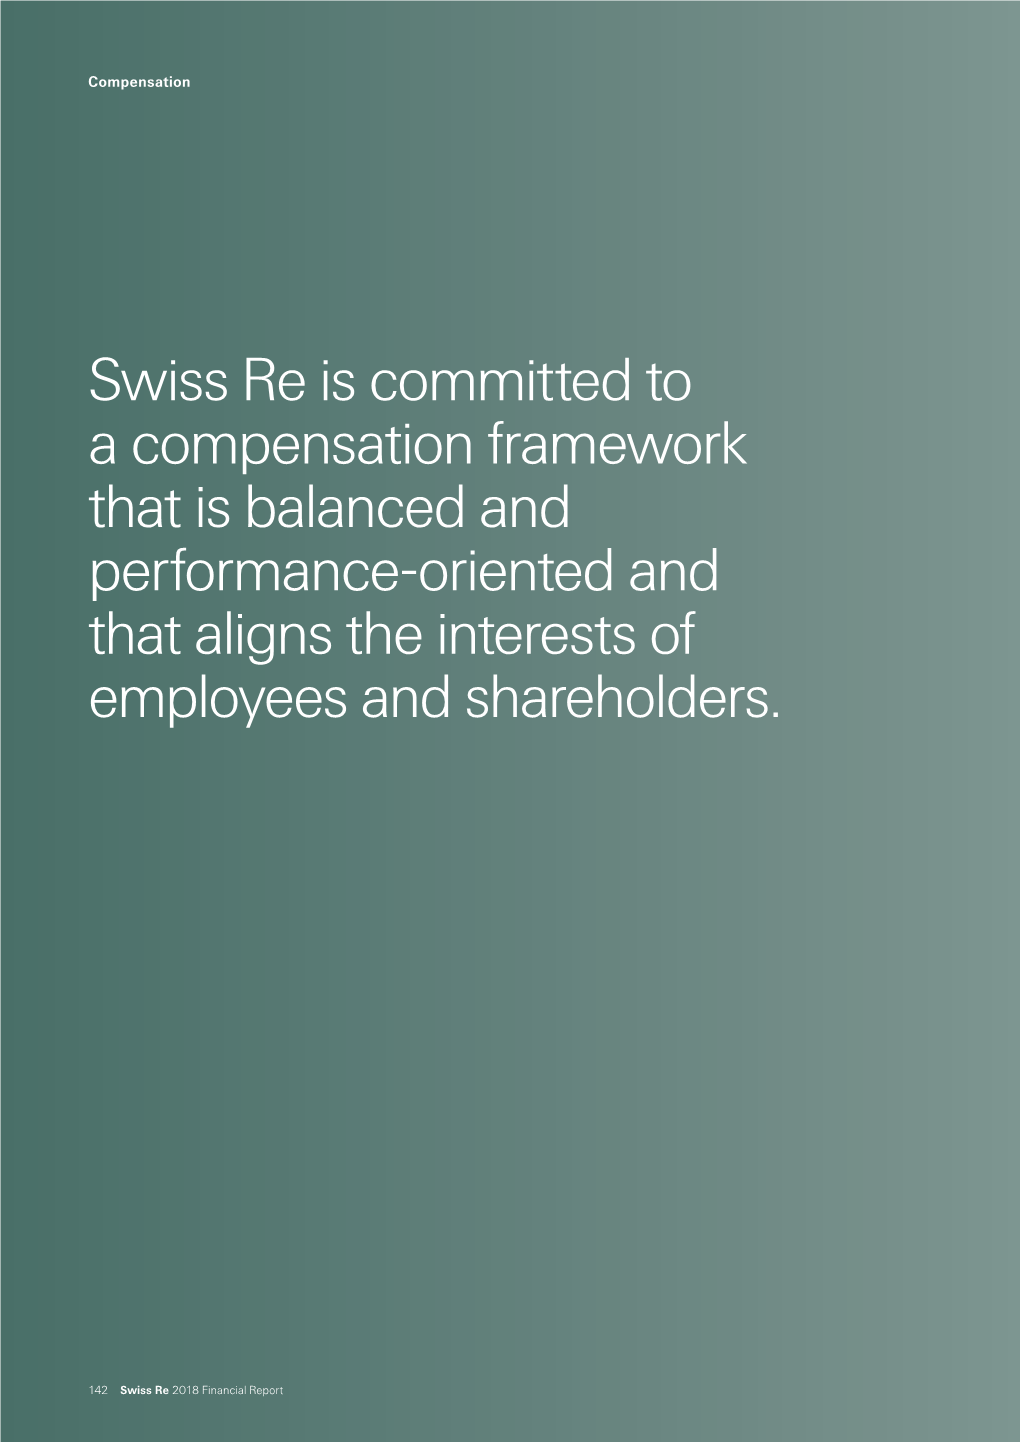 Swiss Re Is Committed to a Compensation Framework That Is Balanced and Performance-Oriented and That Aligns the Interests of Employees and Shareholders